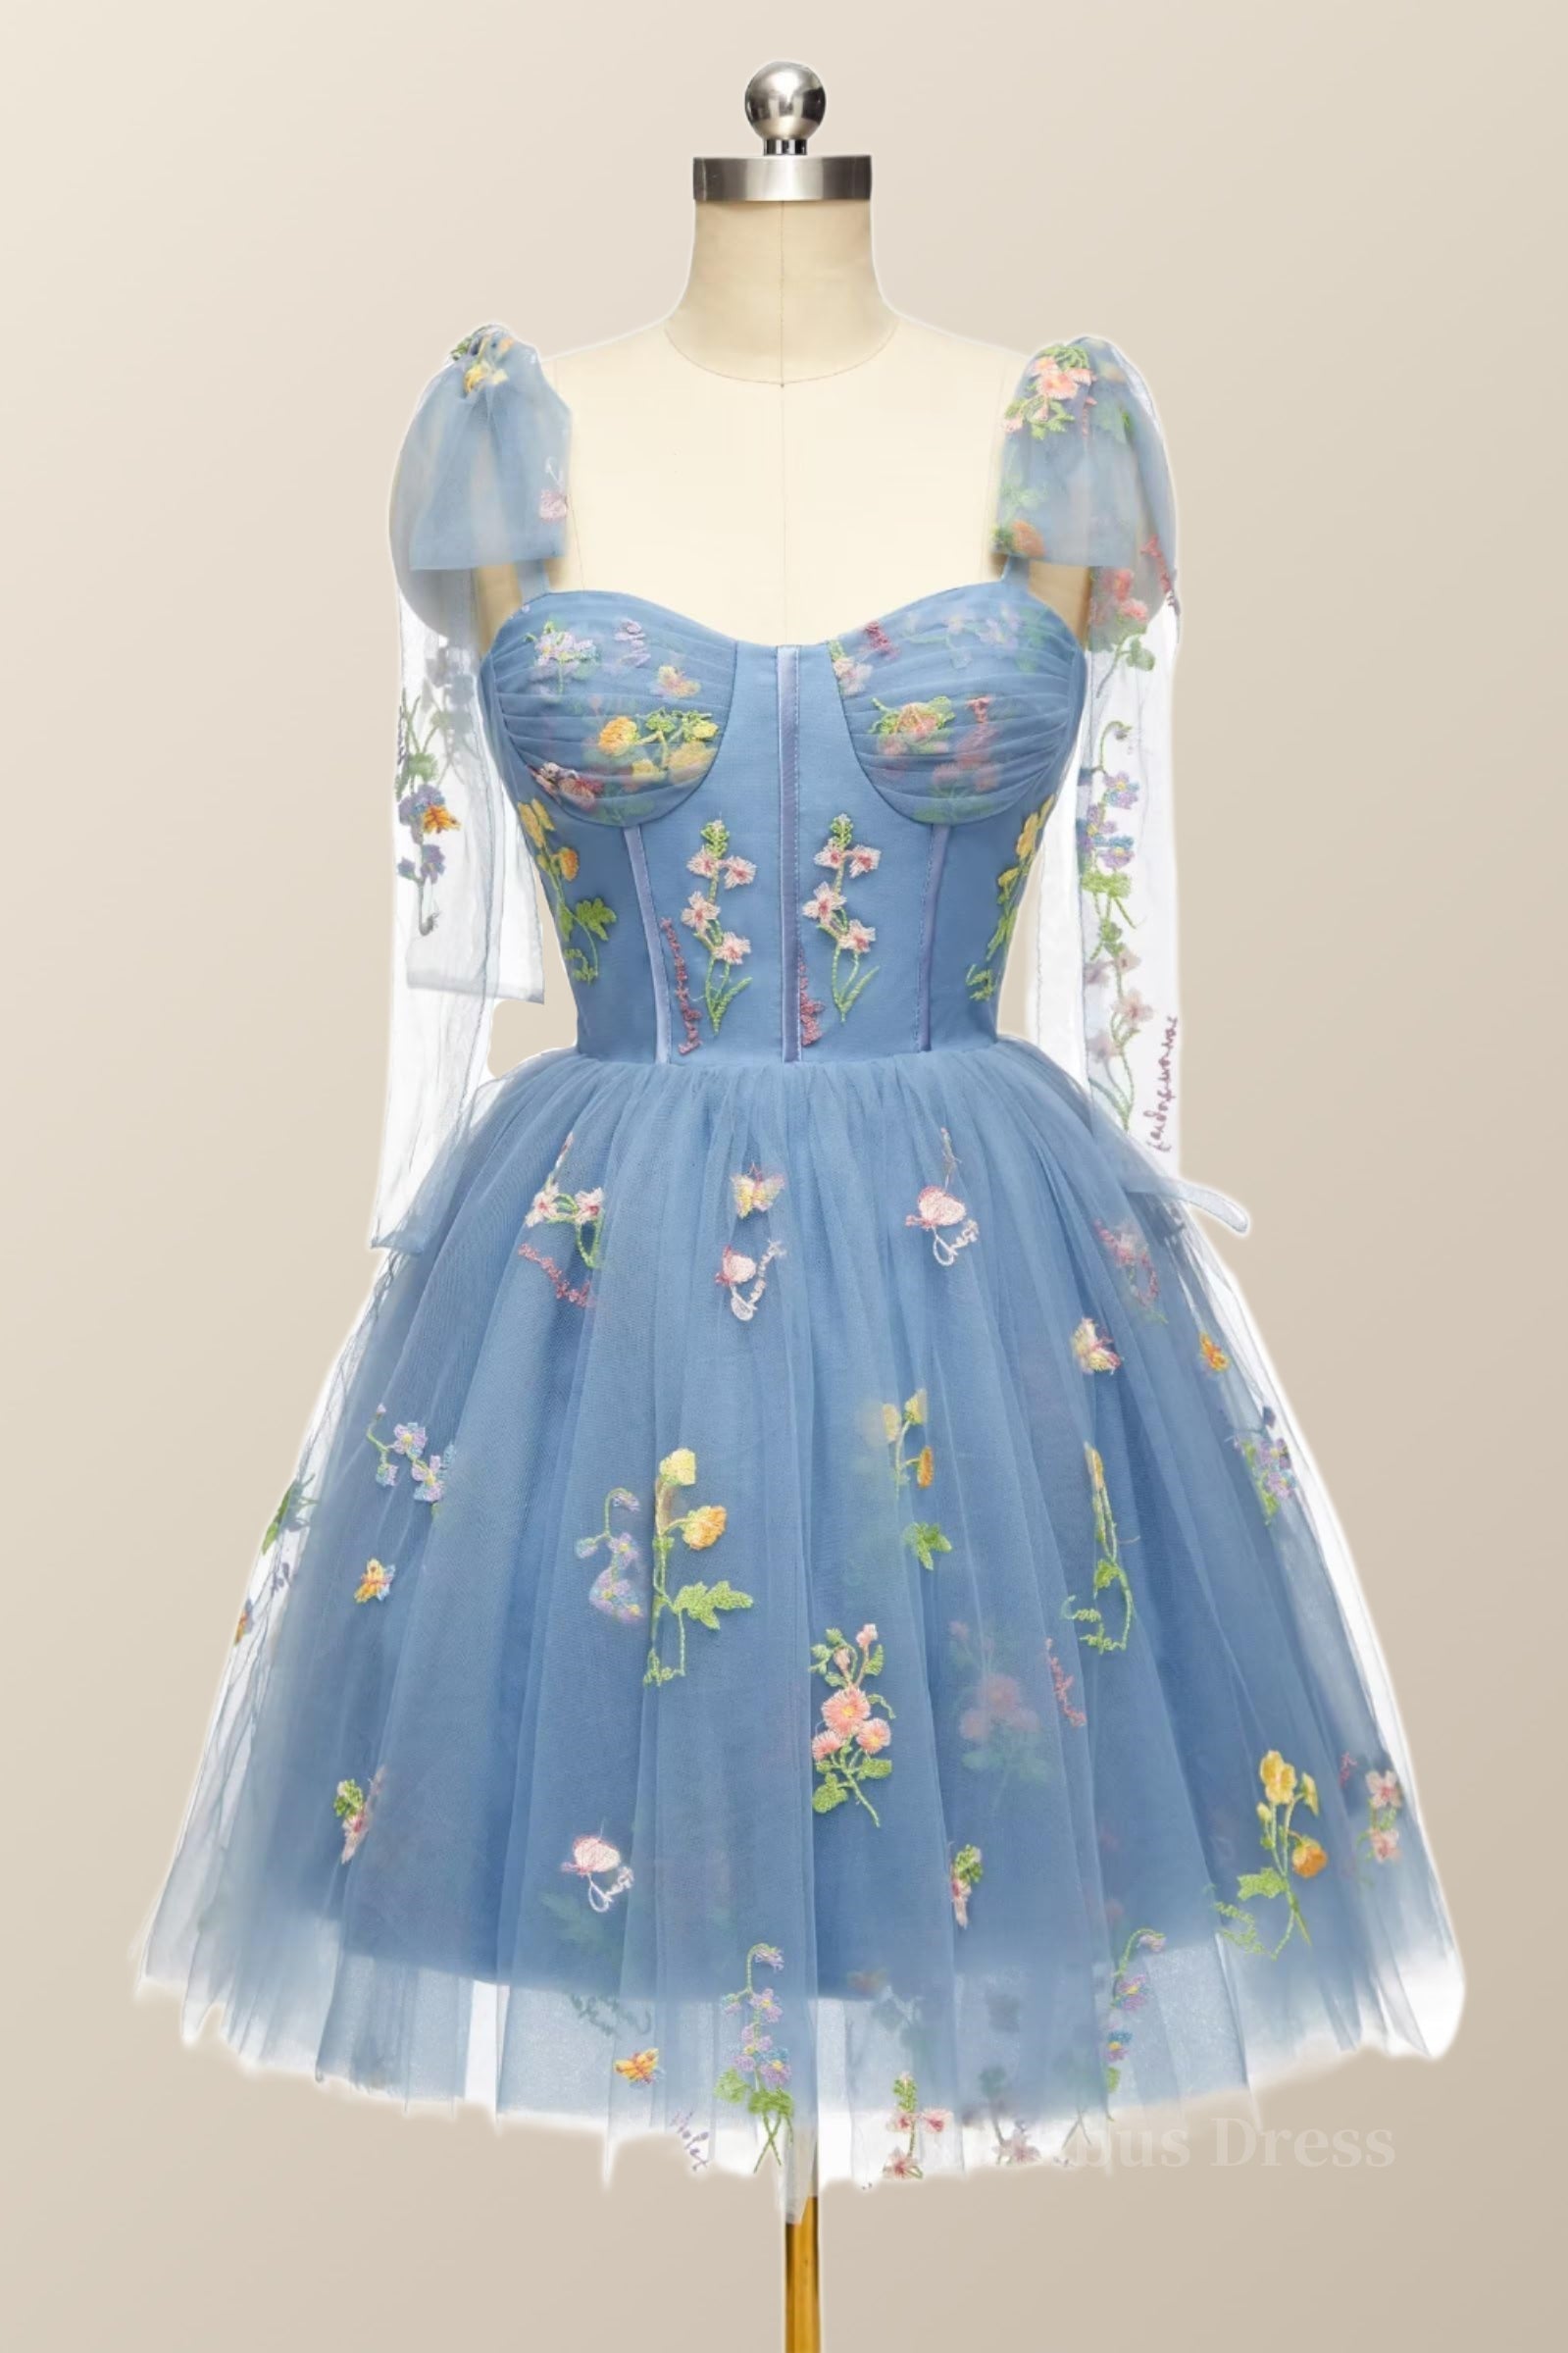 Prom Dress With Long Sleeves, Blue Floral Corset A-line Homecoming Dress with Tie Shoulders